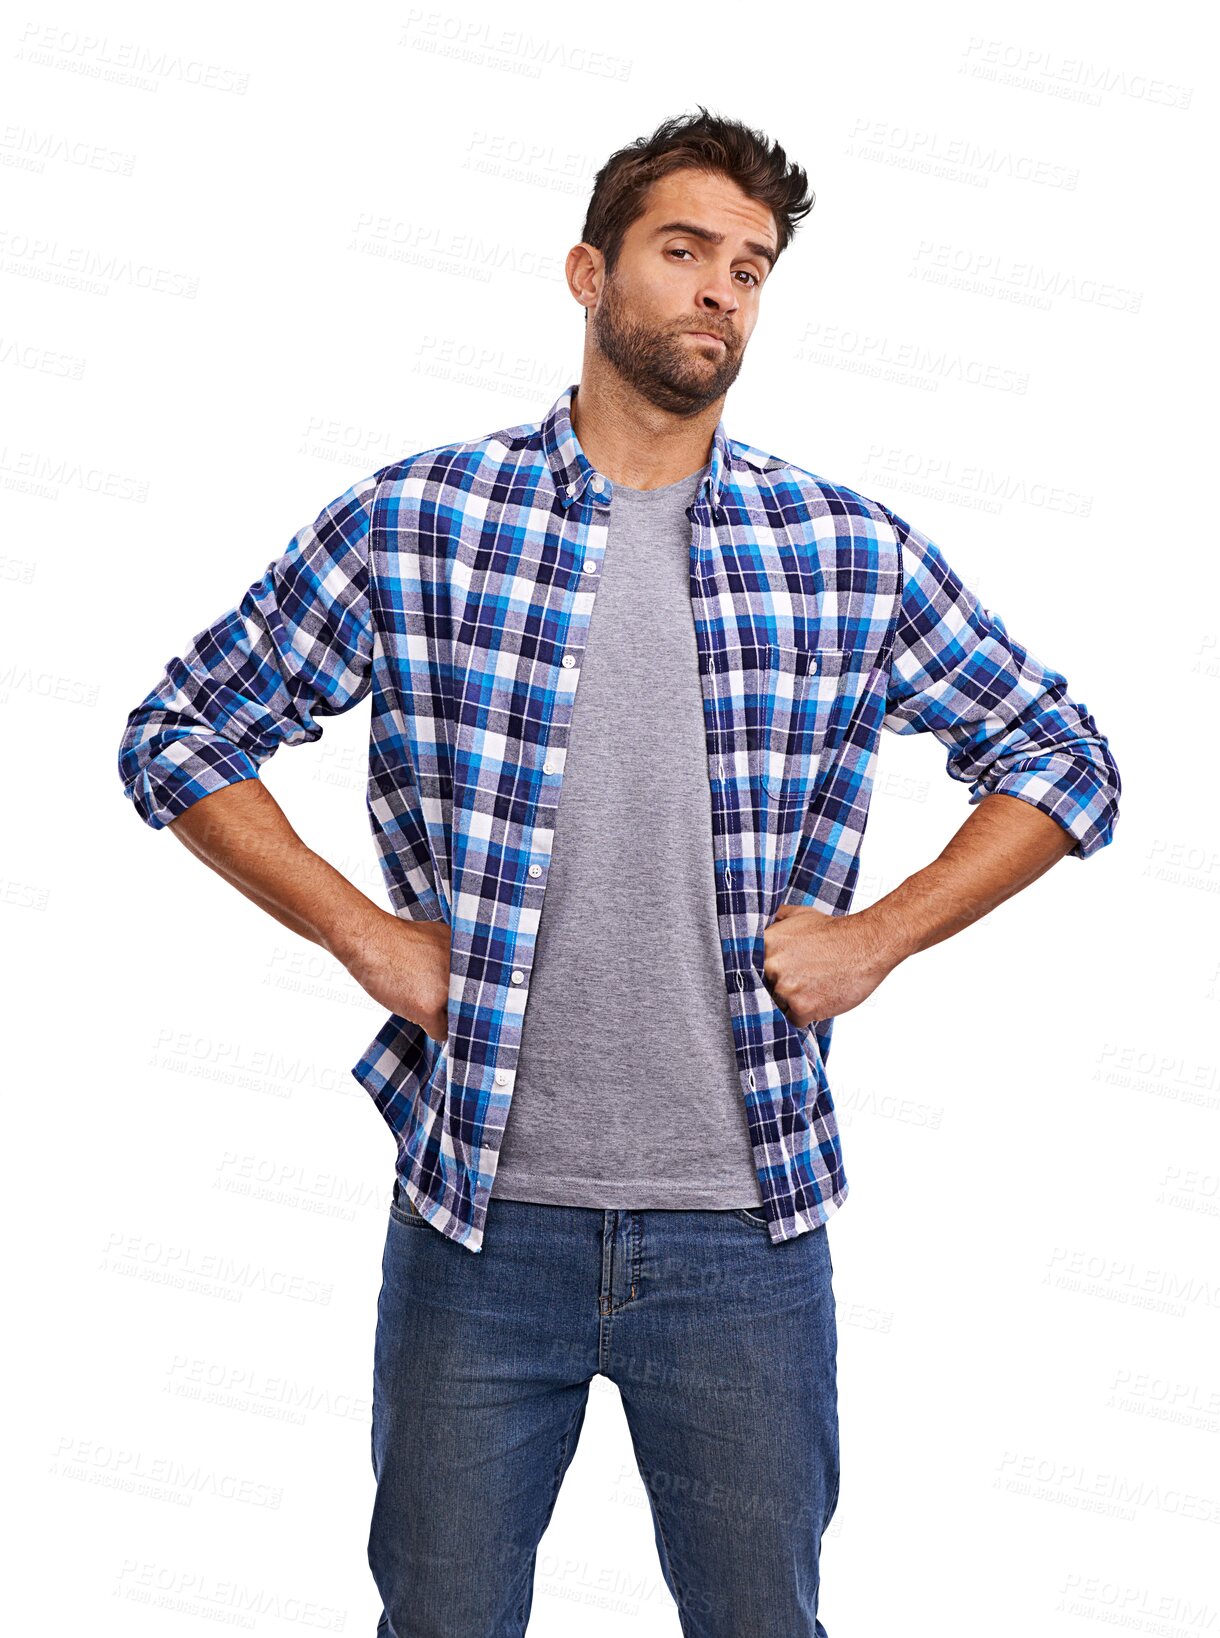 Buy stock photo Angry, hands on hips and portrait of a man isolated on a transparent, png background with doubt. Casual and serious male person with a frown for problem, bad choice review or tough guy character